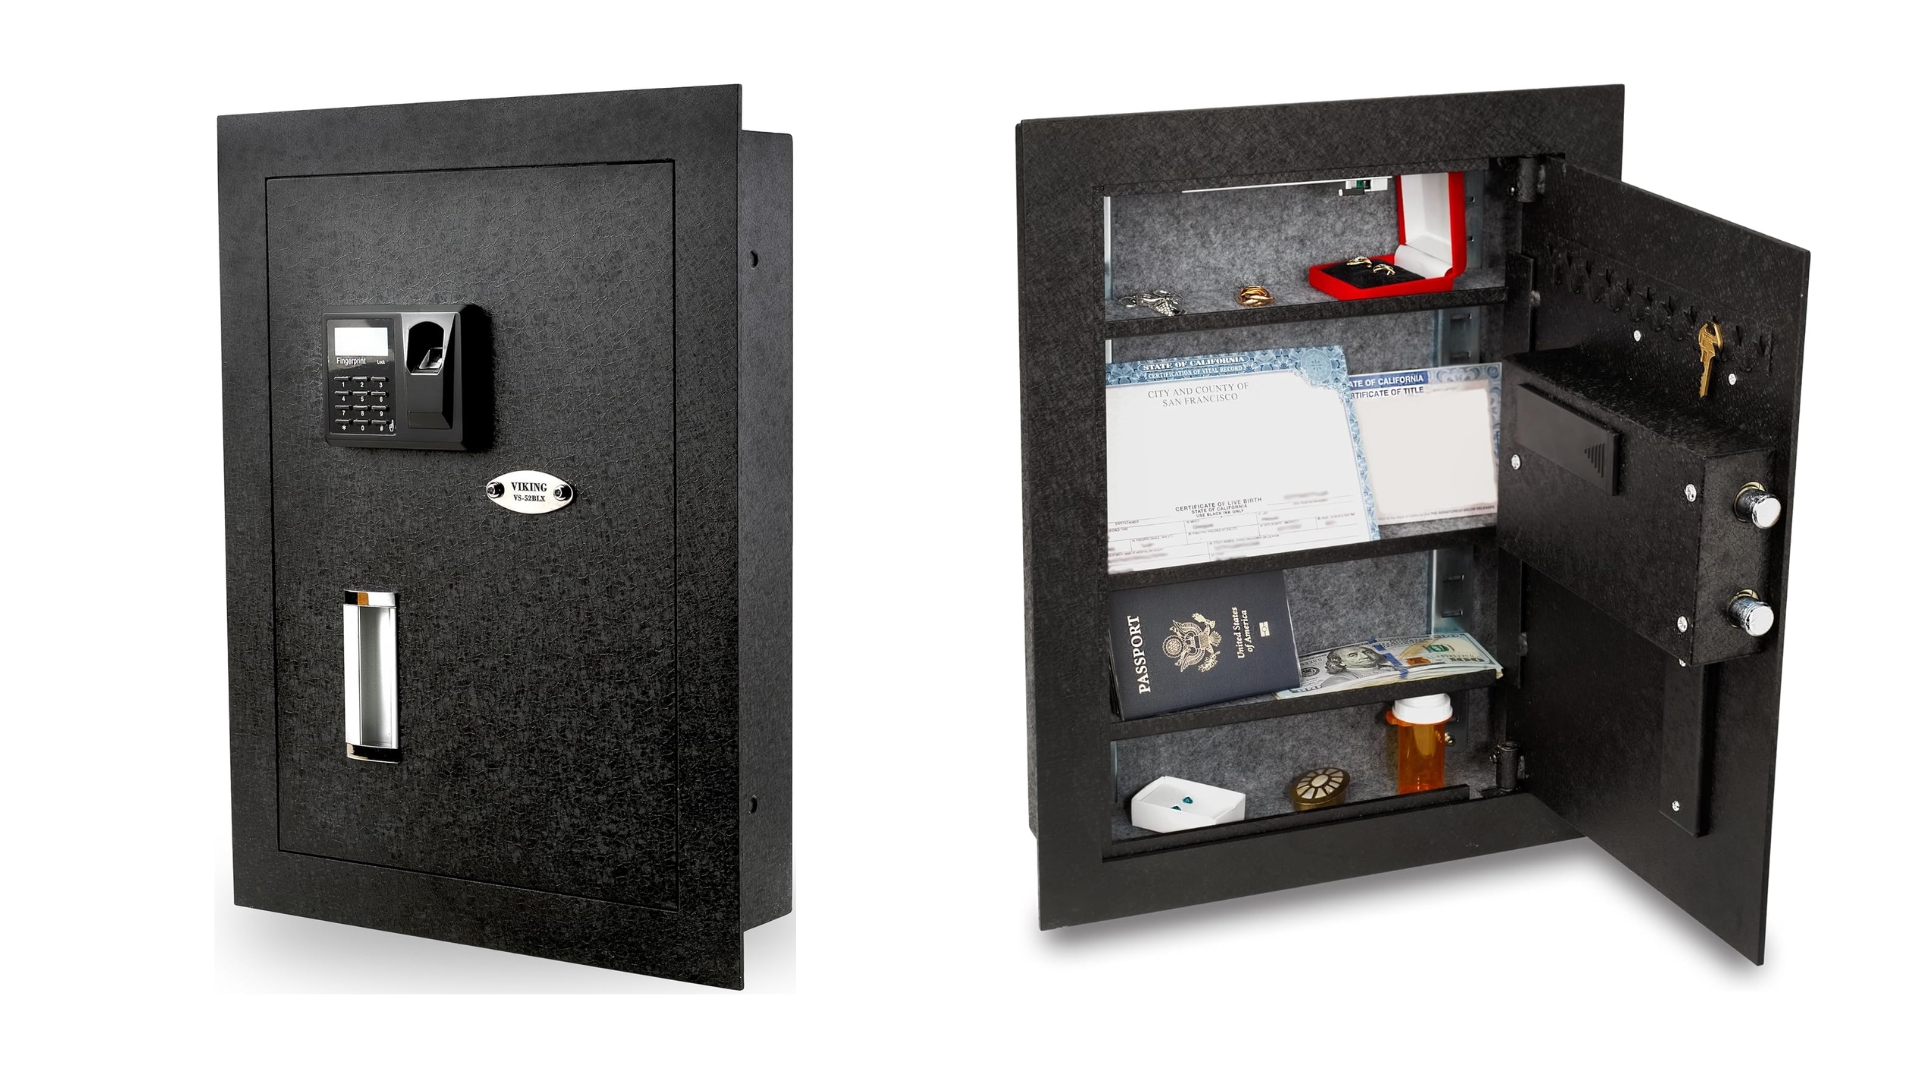 An image showing the outer and inner parts of wall safes